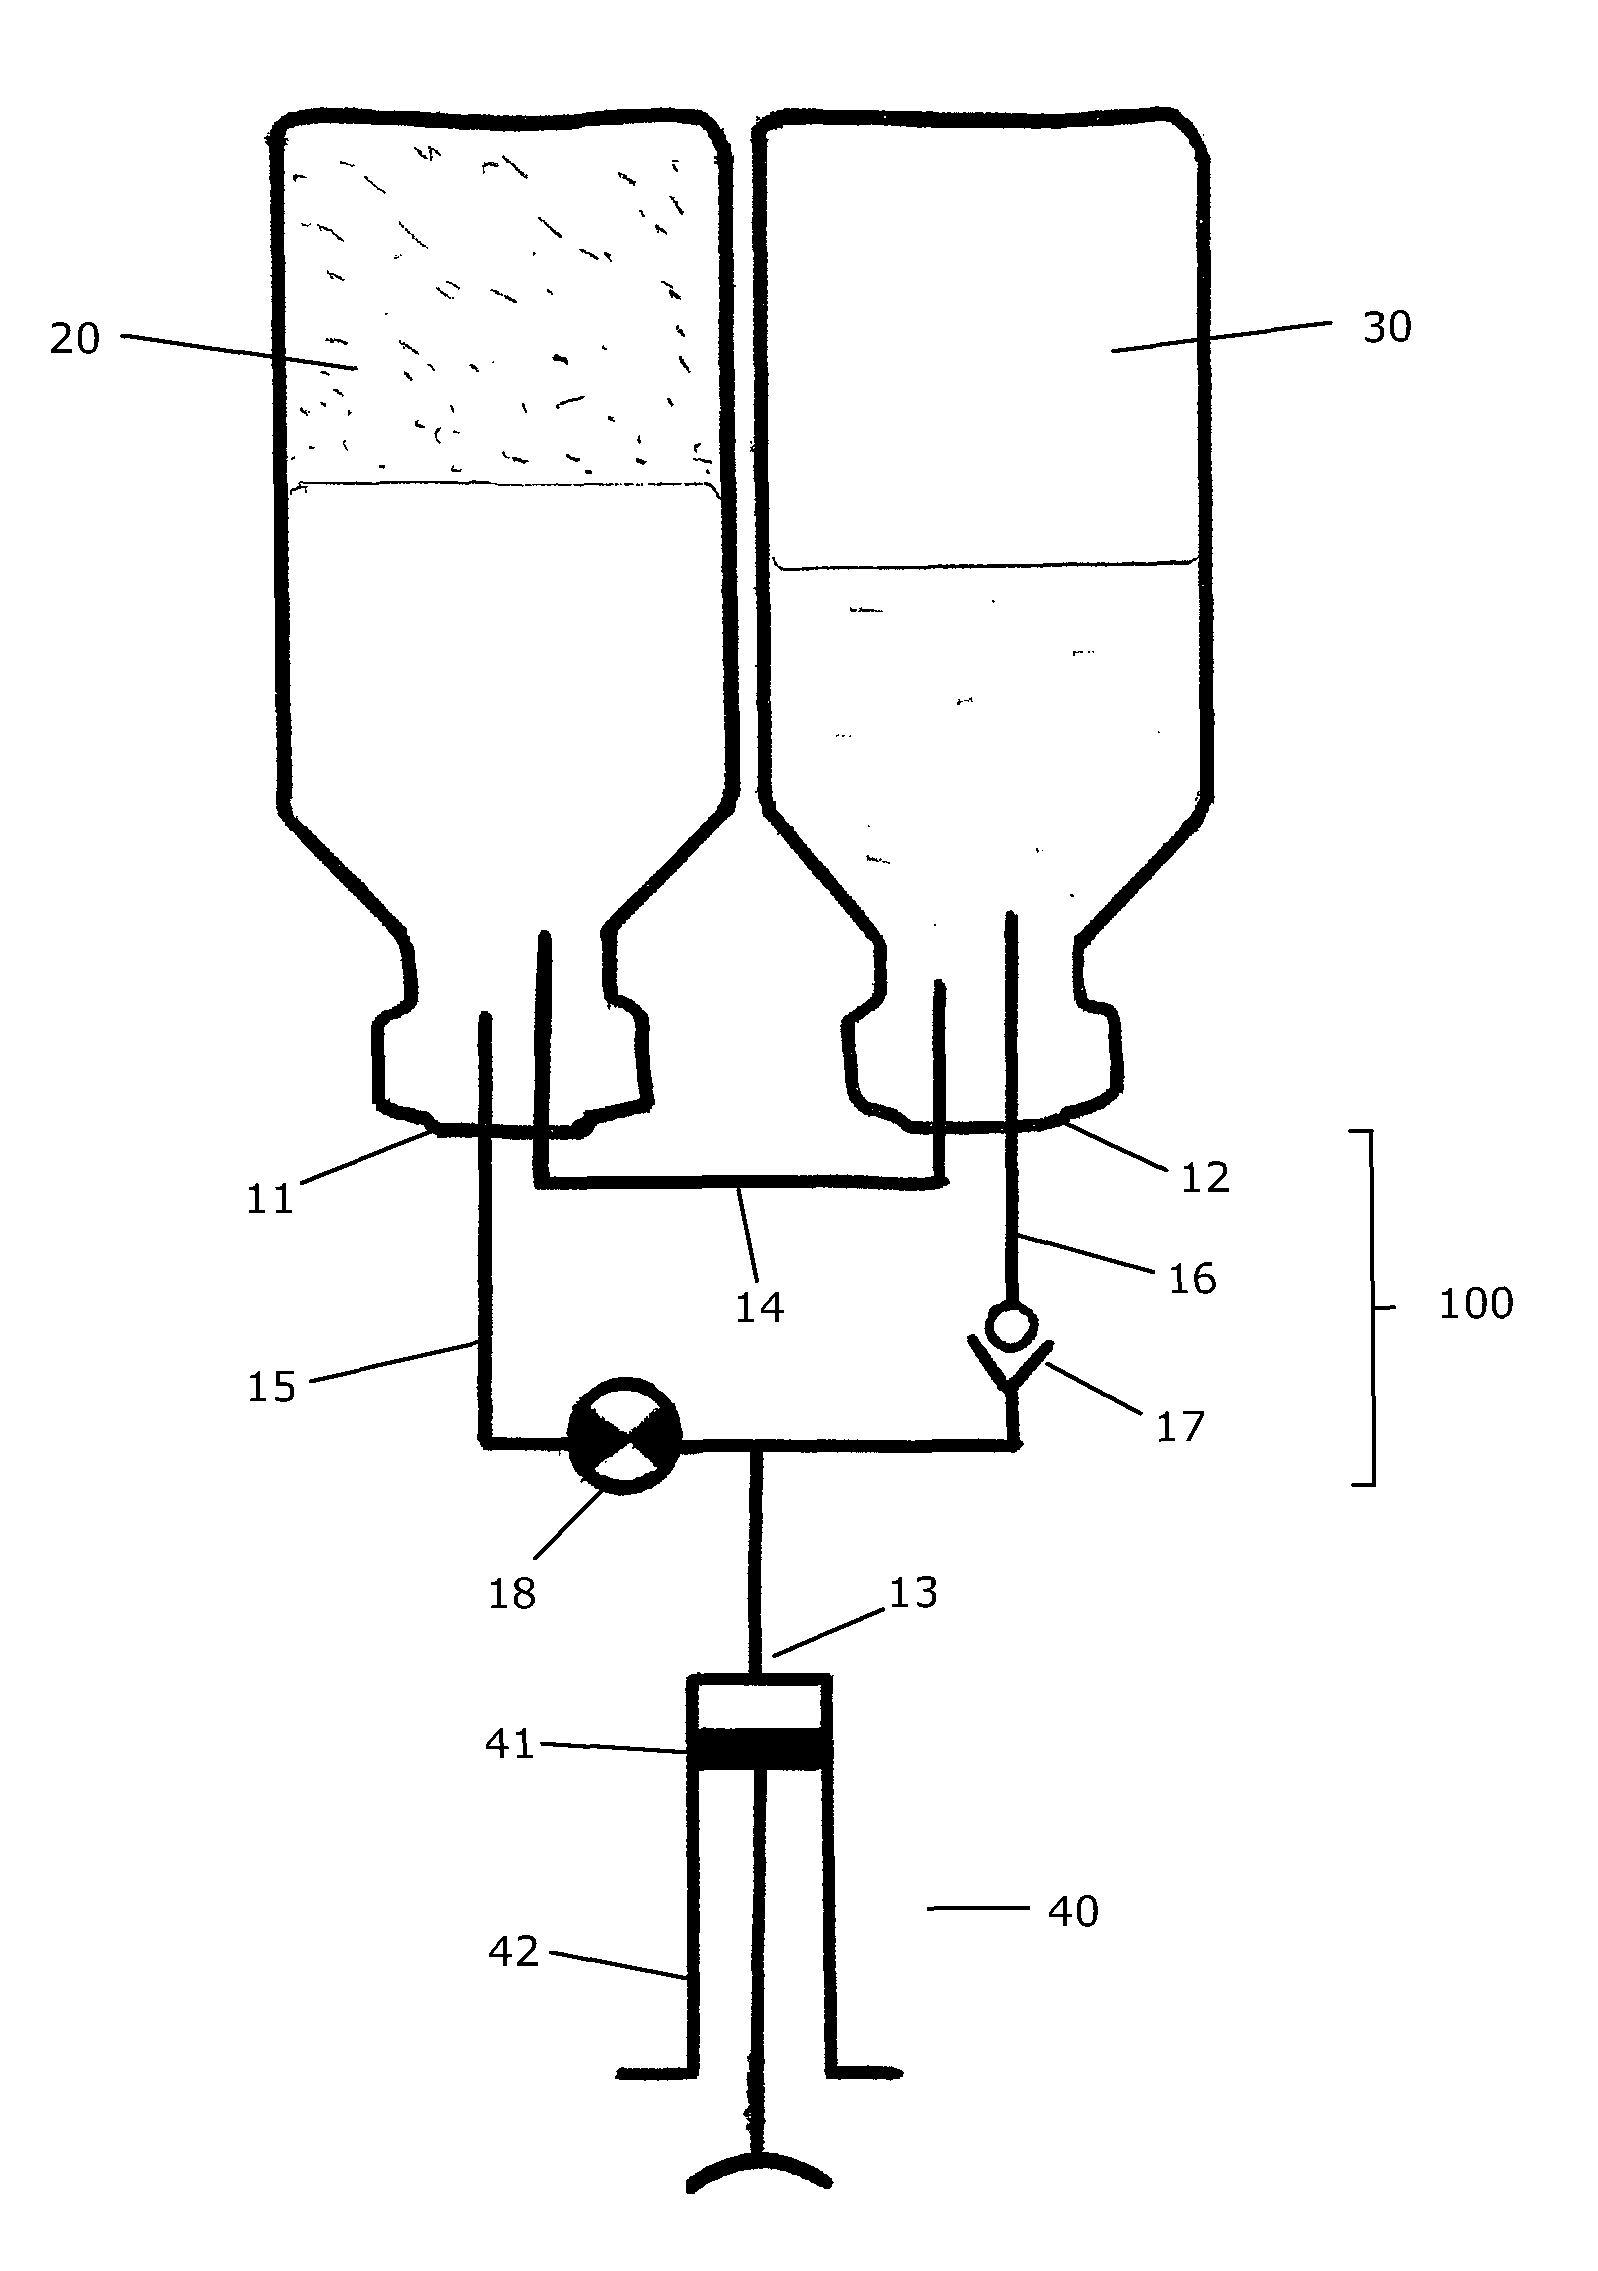 Transfer system for forming a drug solution from a lyophilized drug